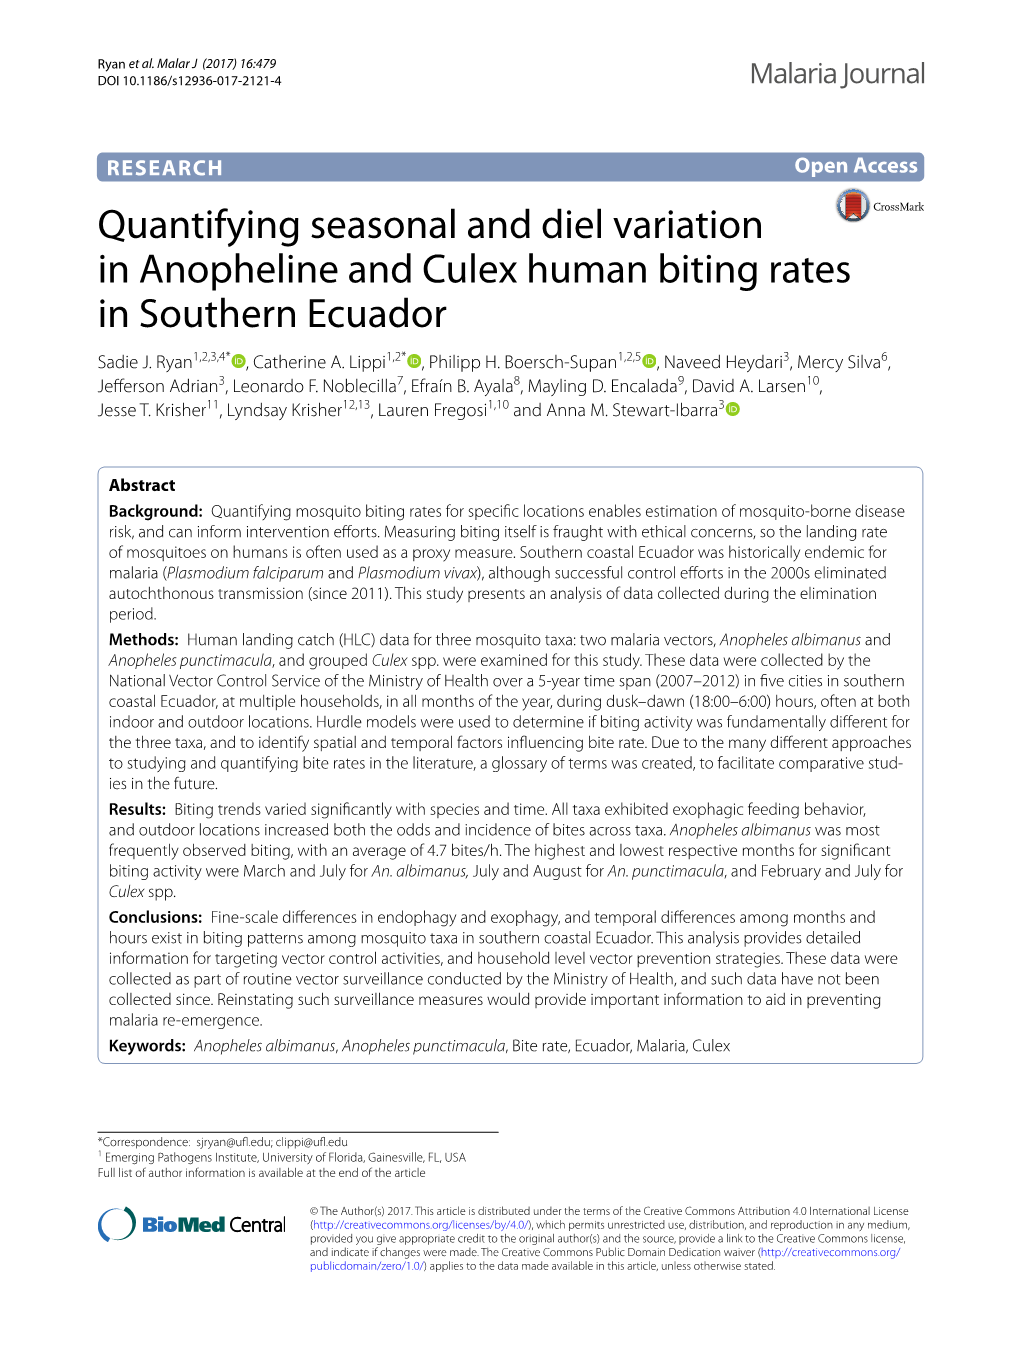 Quantifying Seasonal and Diel Variation in Anopheline and Culex Human Biting Rates in Southern Ecuador Sadie J